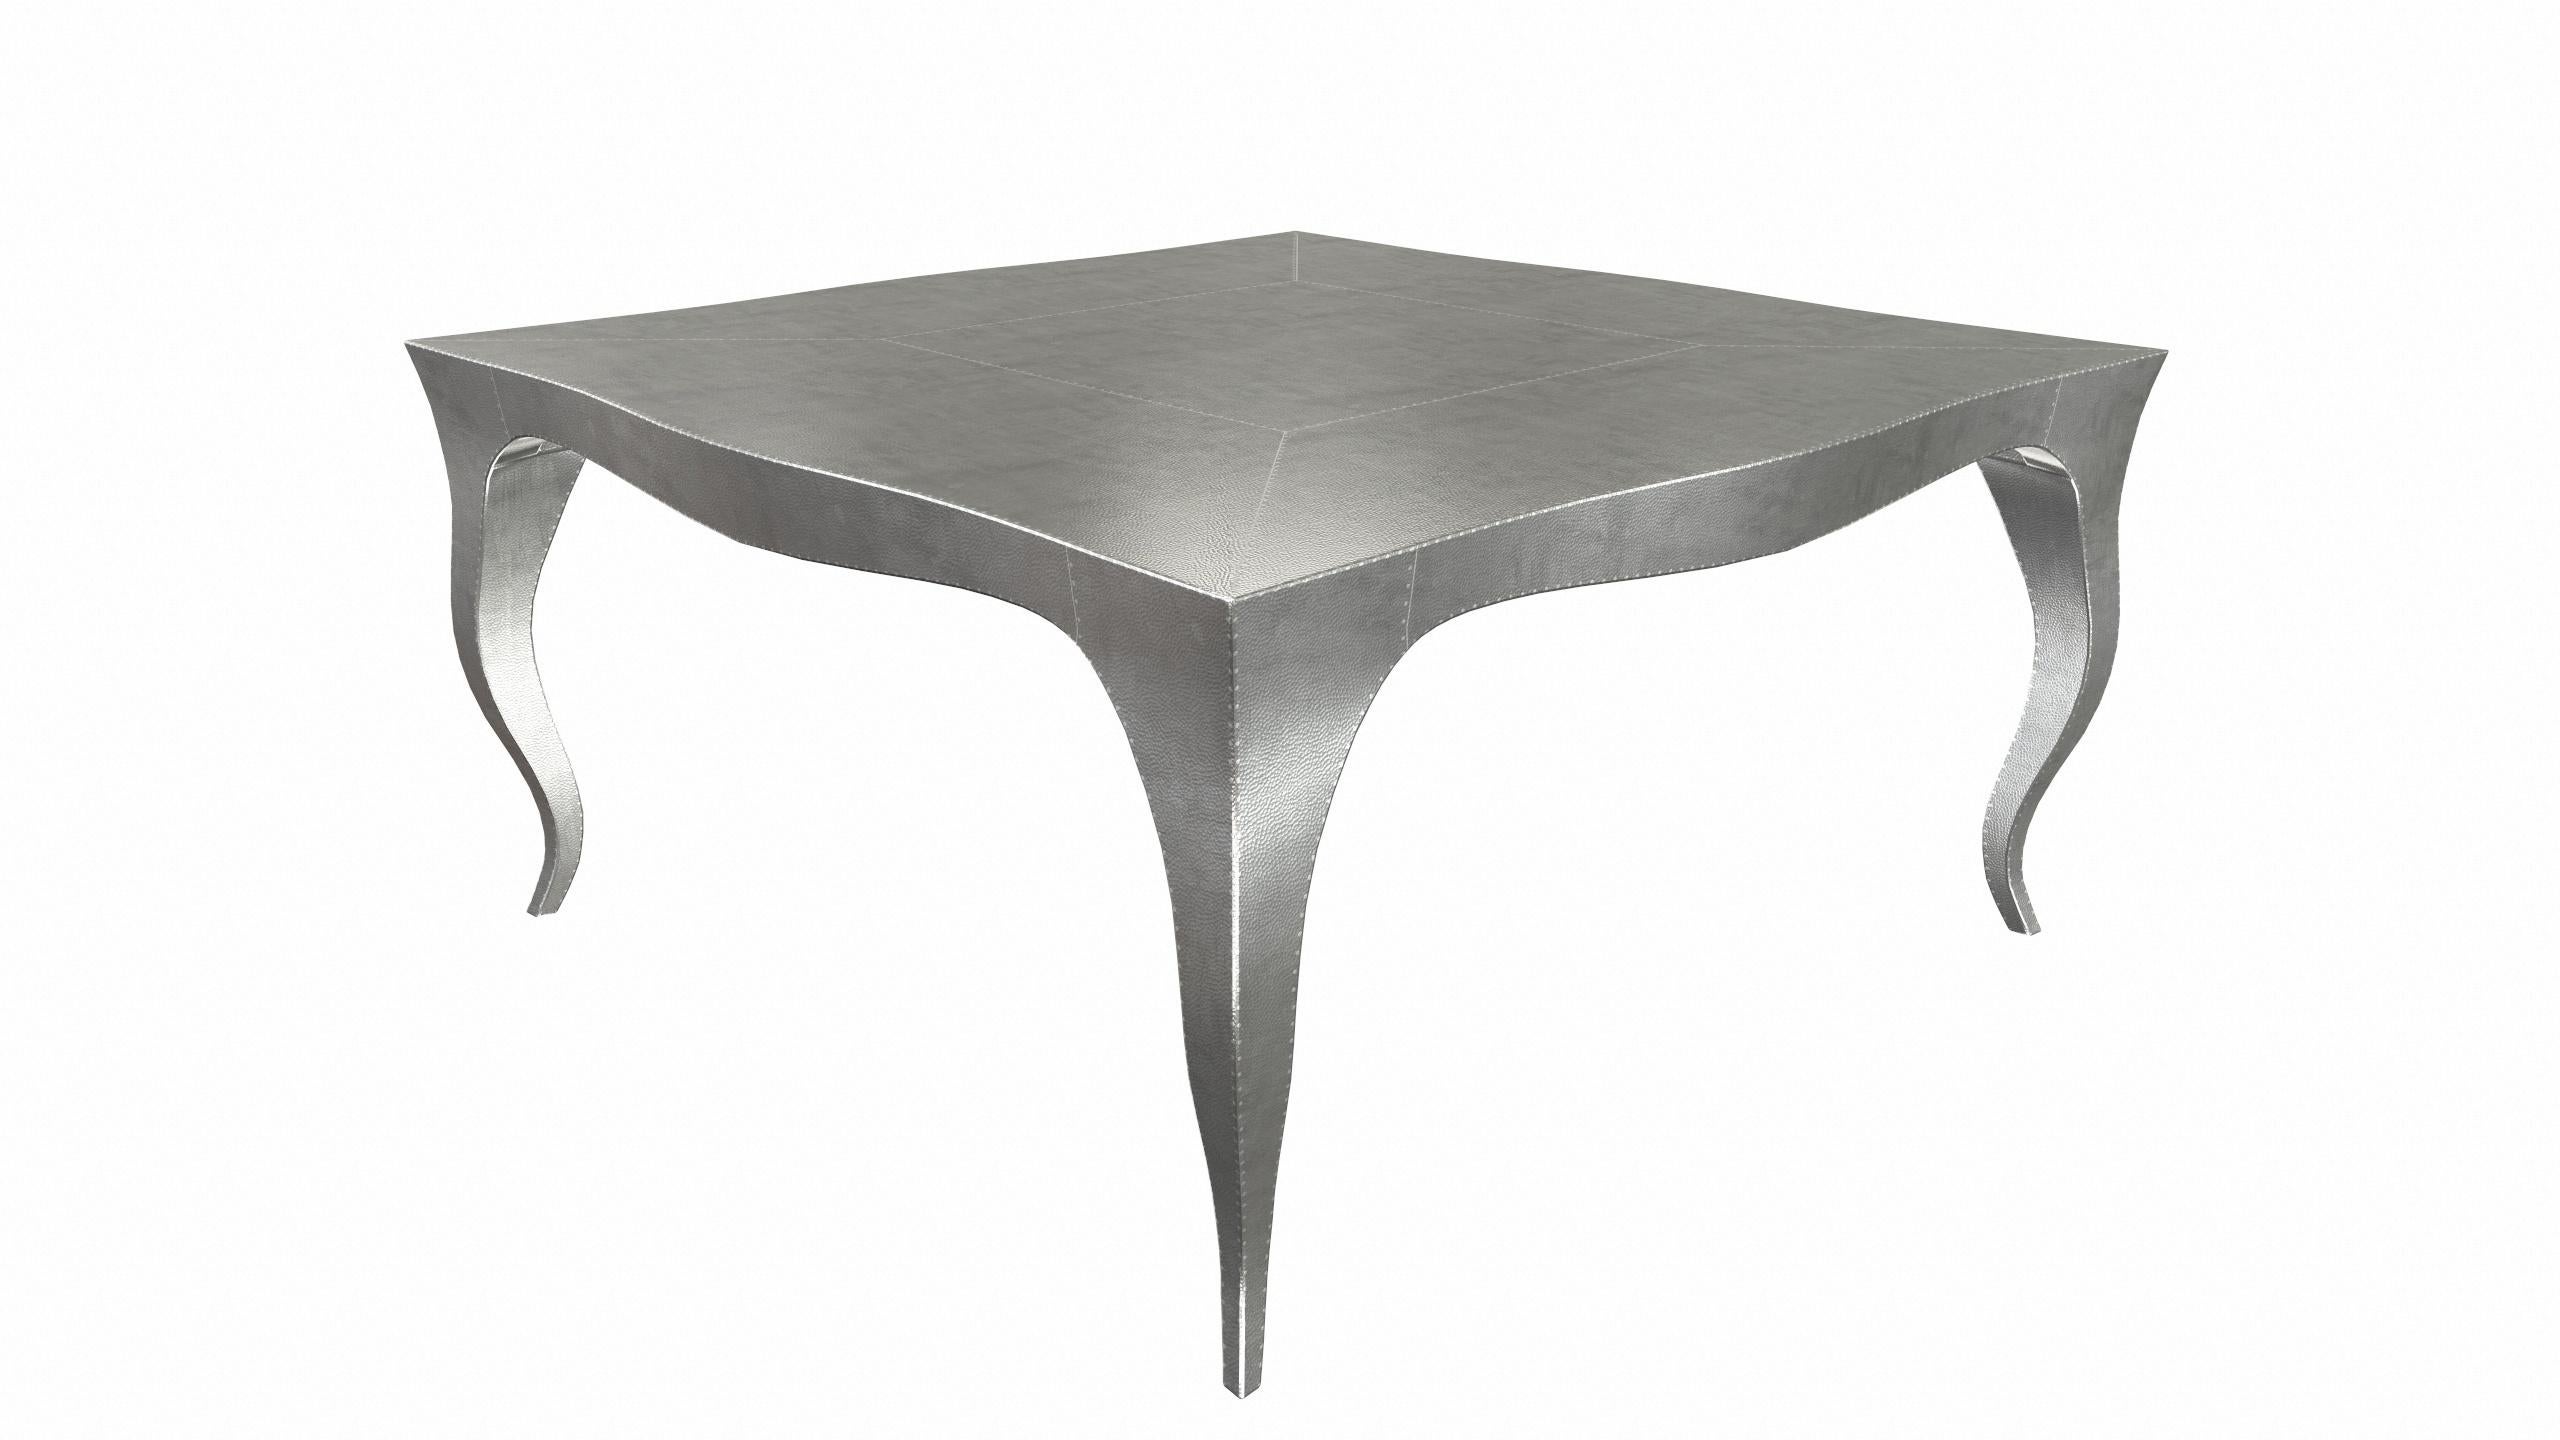 American Louise Art Deco Nesting Tables Mid. Hammered White Bronze 18.5x18.5x10 inch   For Sale